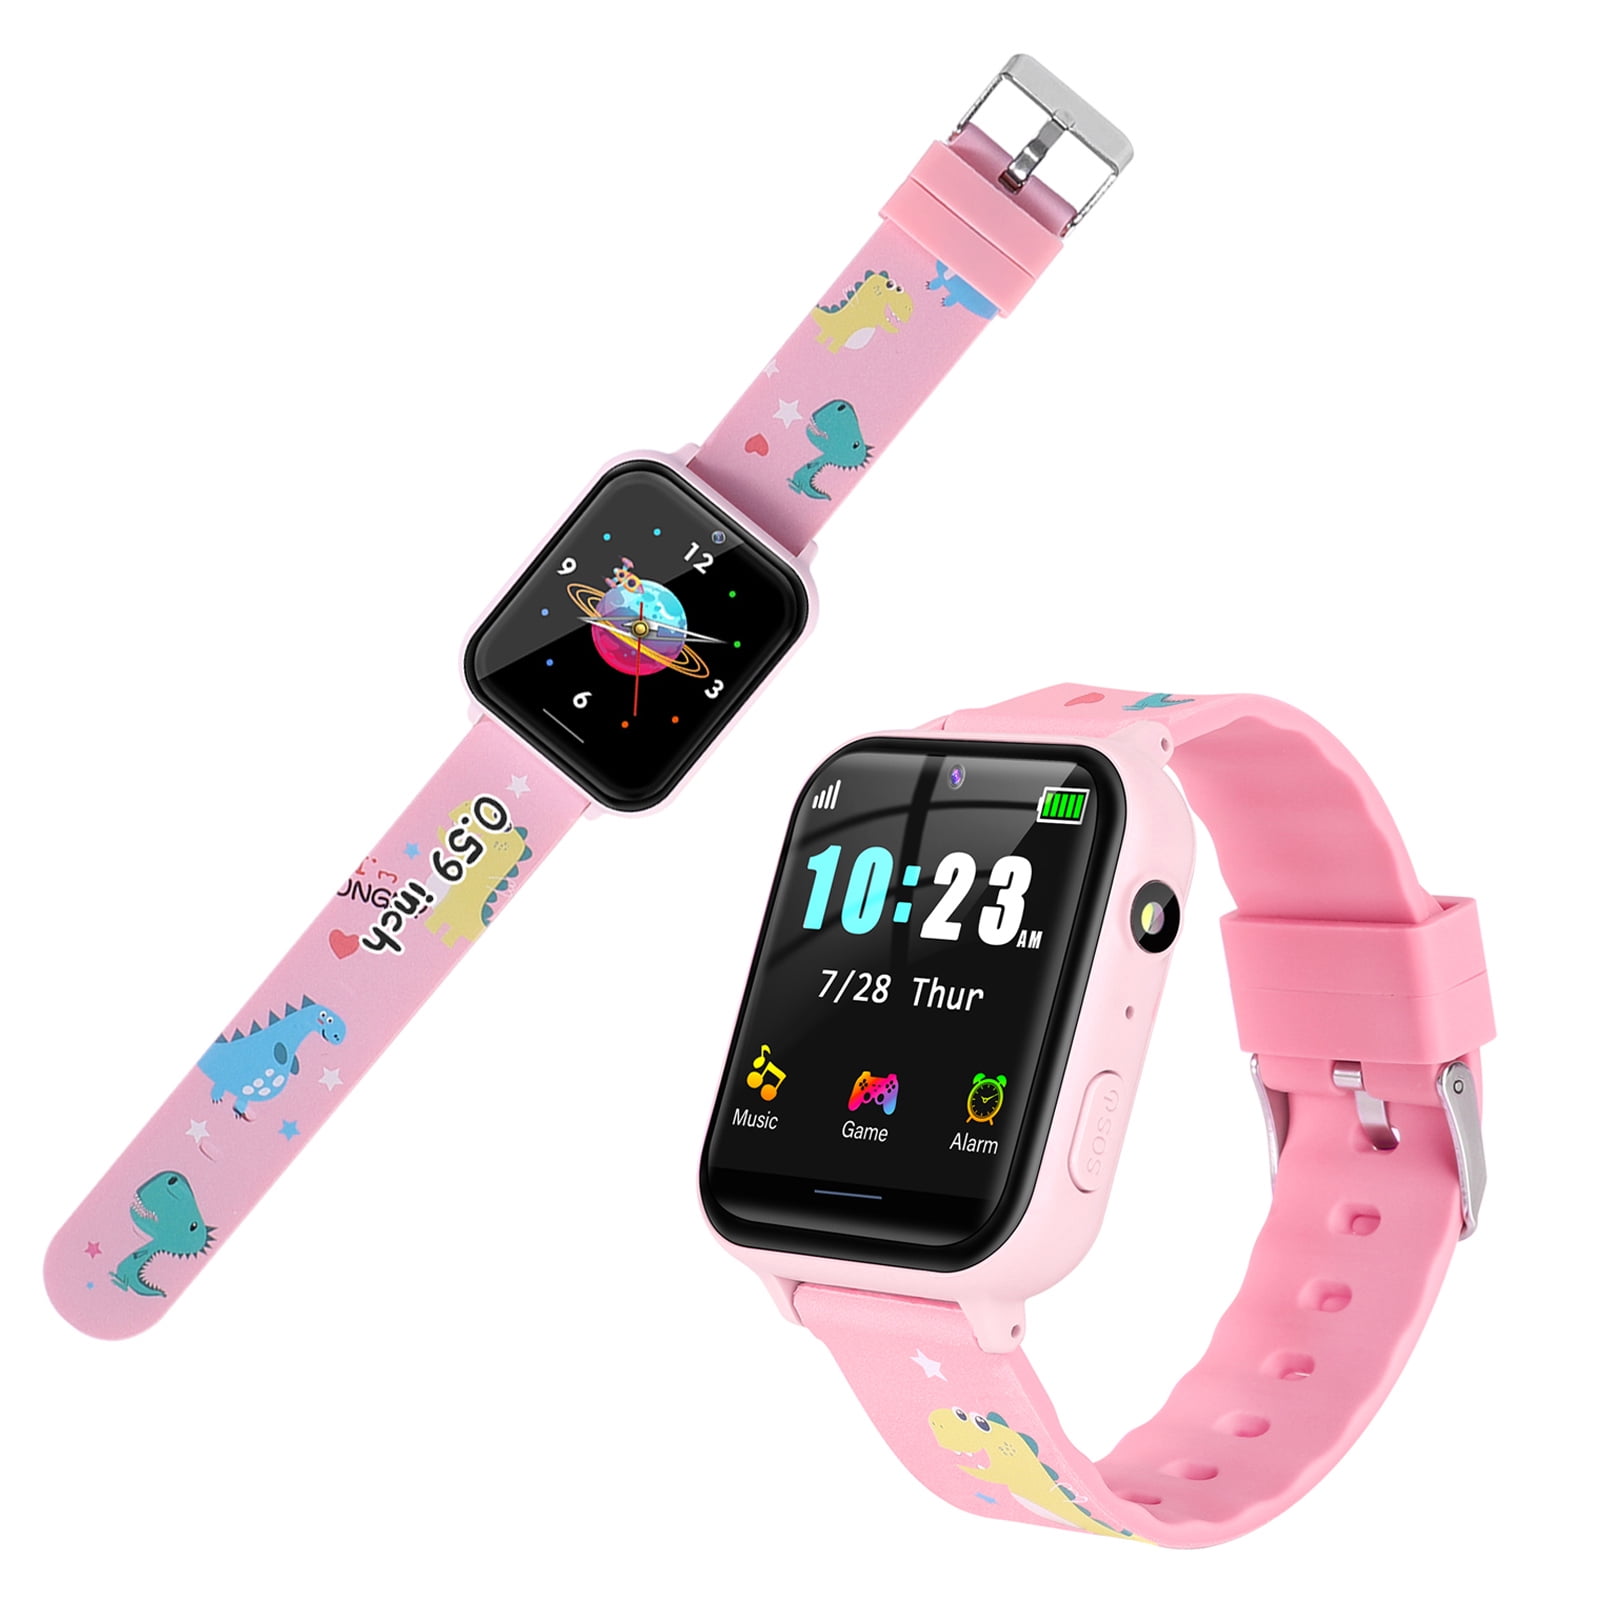 2021 Smart Watch for Kids - Watches for Boys Girls Smartwatch Watch Wrist Mobile Camera Cell Phone Gift for Girls Children Pink GPS) - Walmart.com